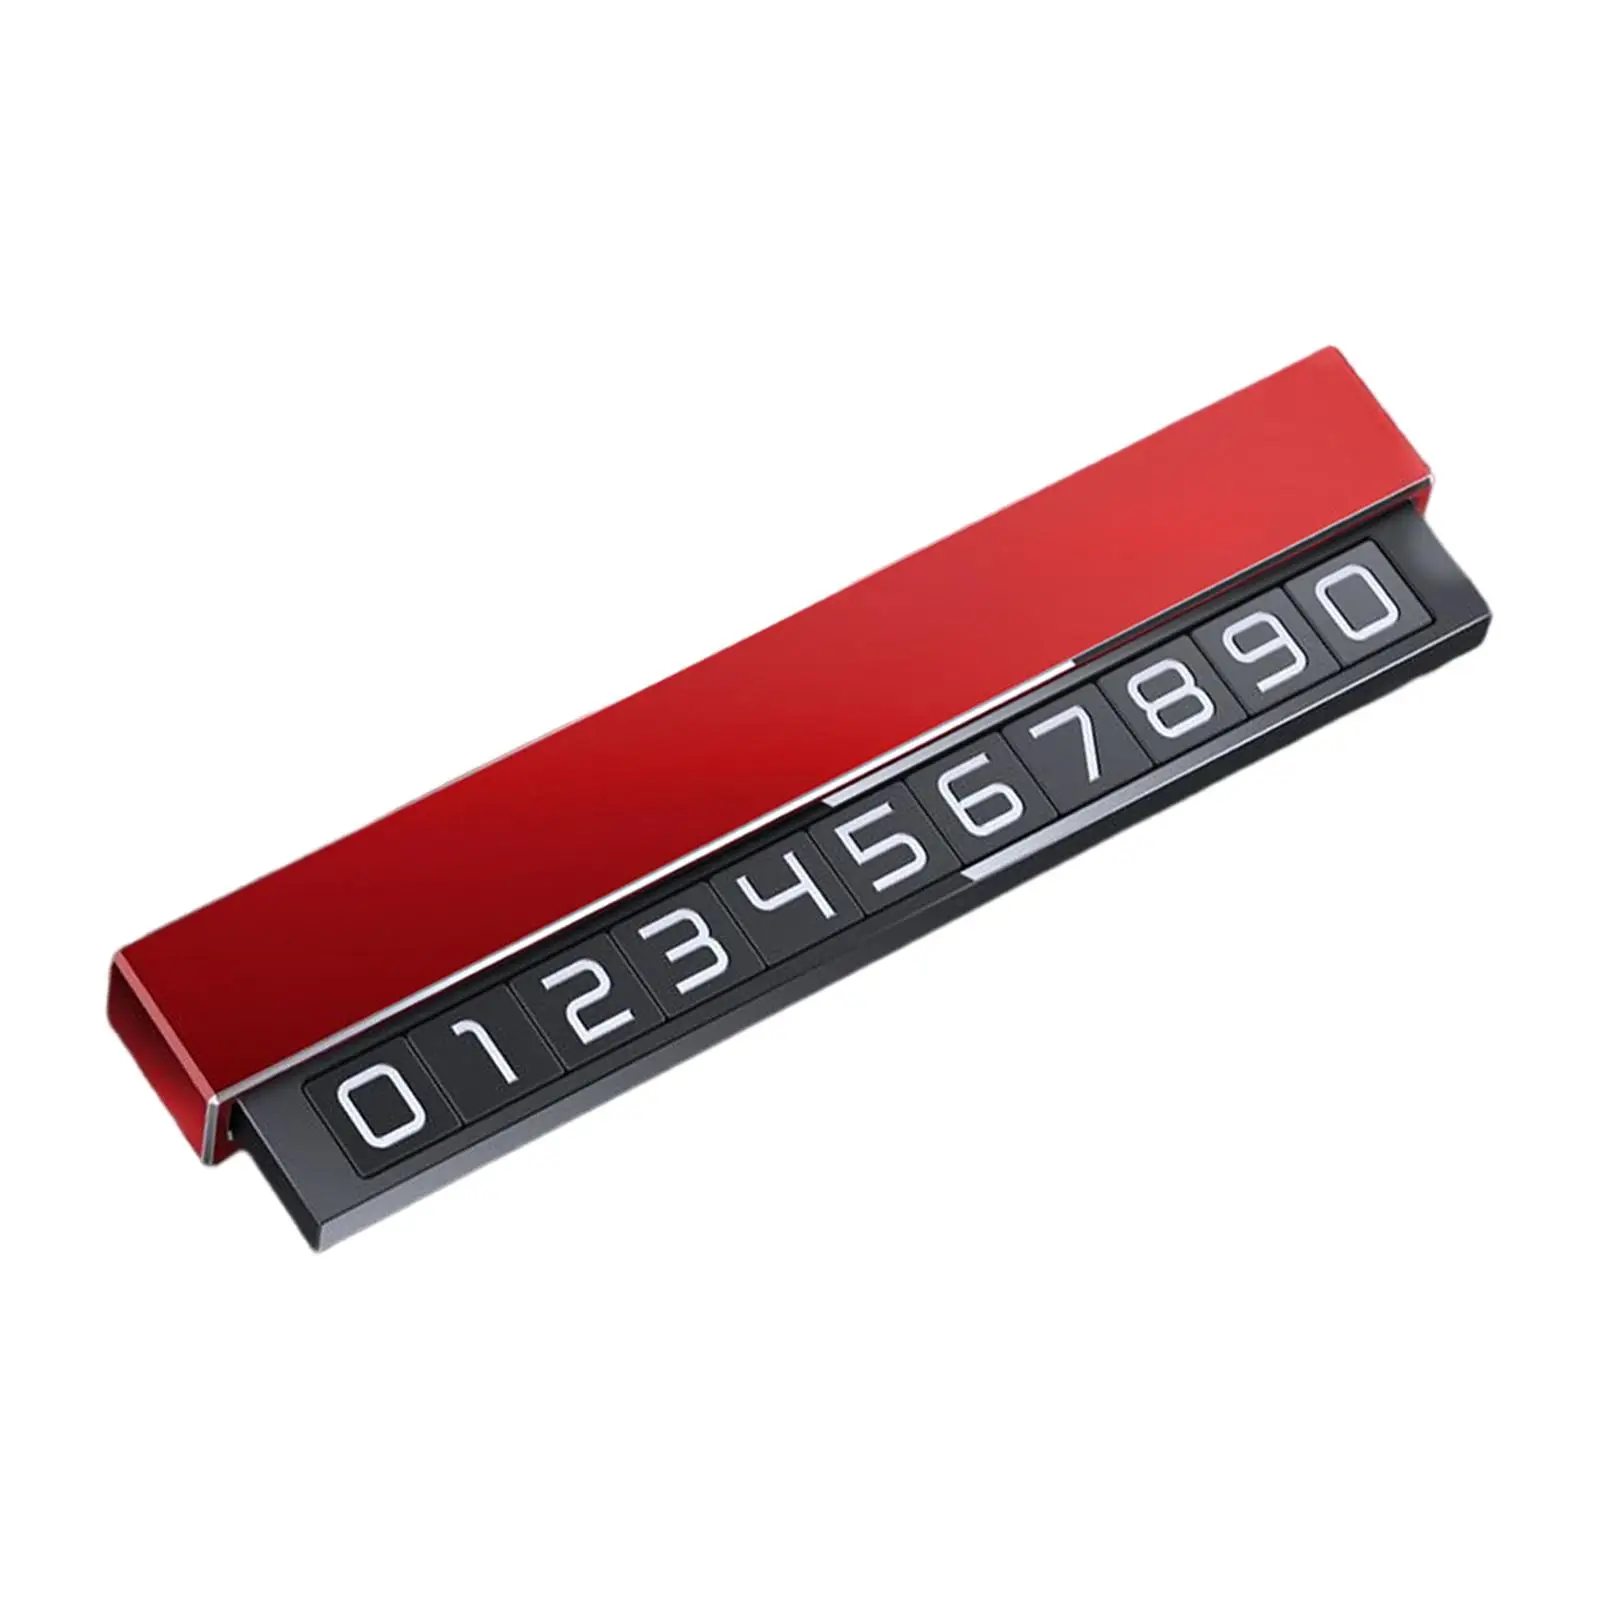 Automobile Parking Number Sign Luminous Creative for Cars Dashboard